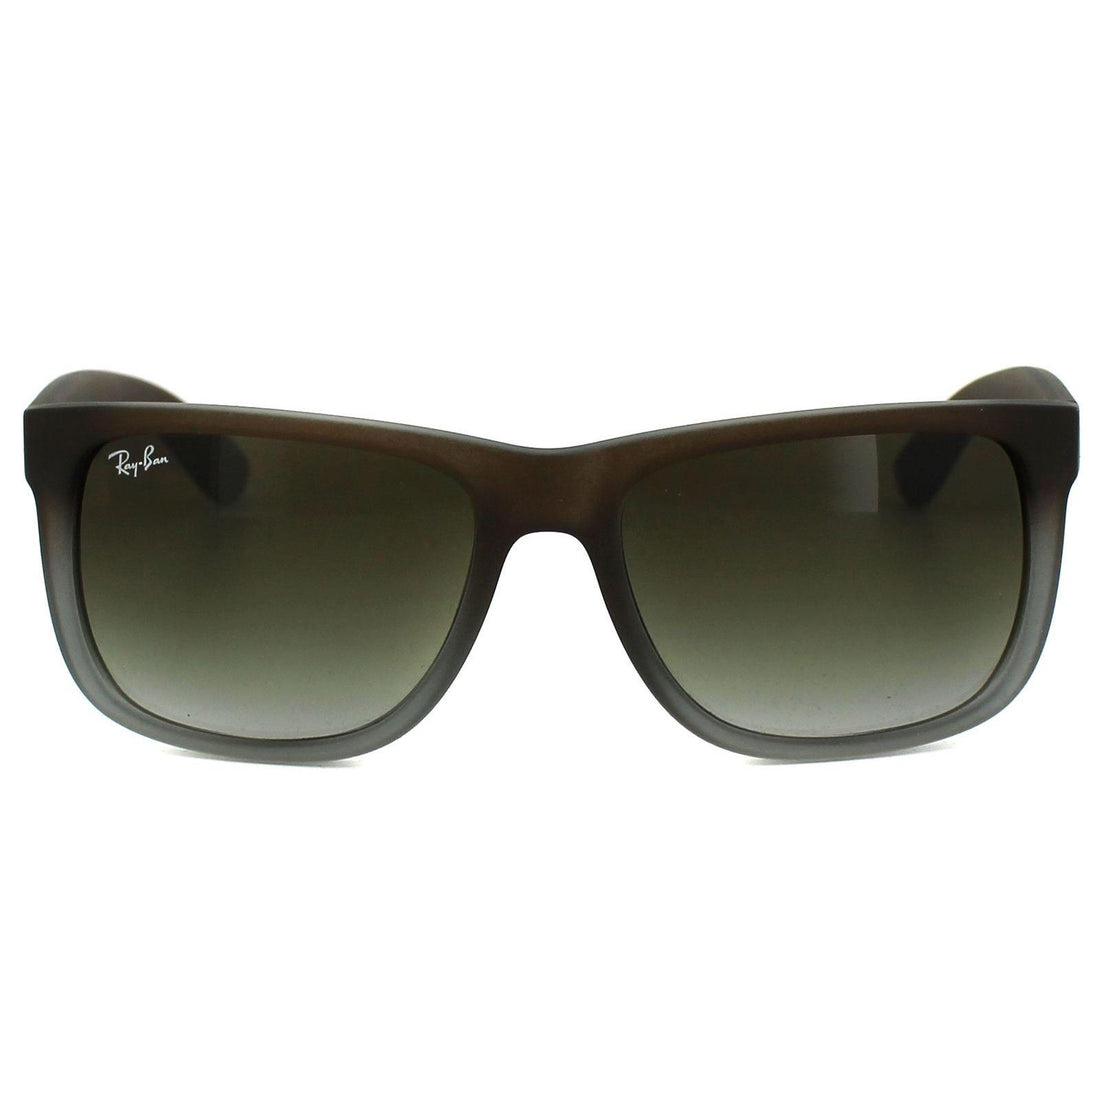 Ray-Ban Justin Classic RB4165 Sunglasses Brown Fade Green Gradient 55